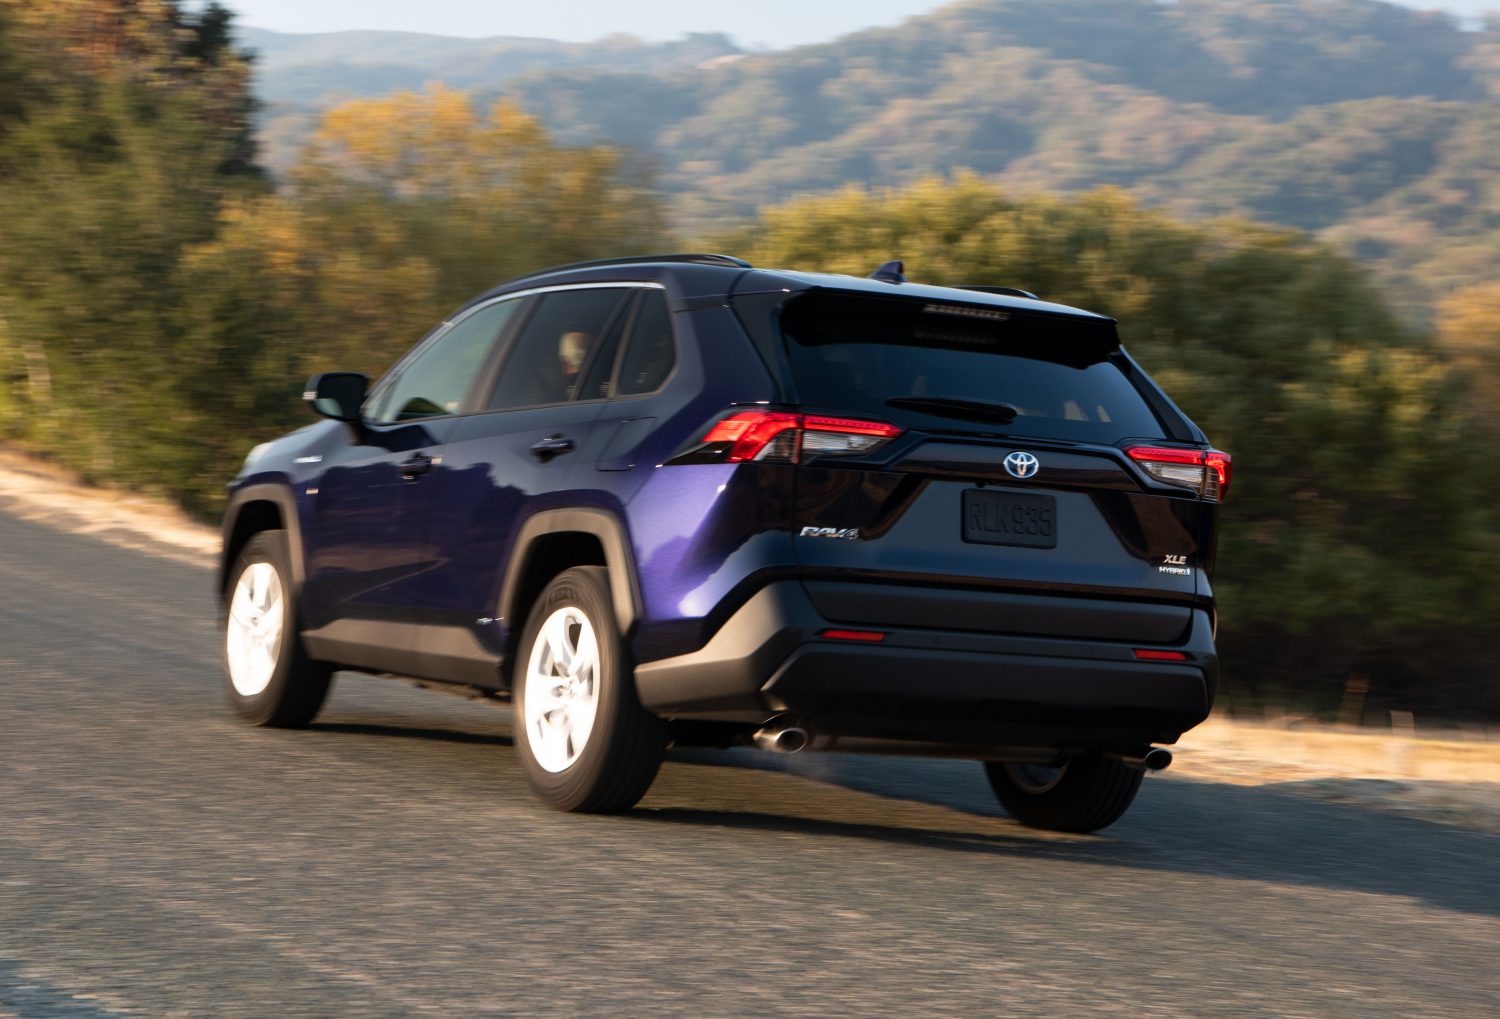 low left rear view of blueprint color rav4 driving on road